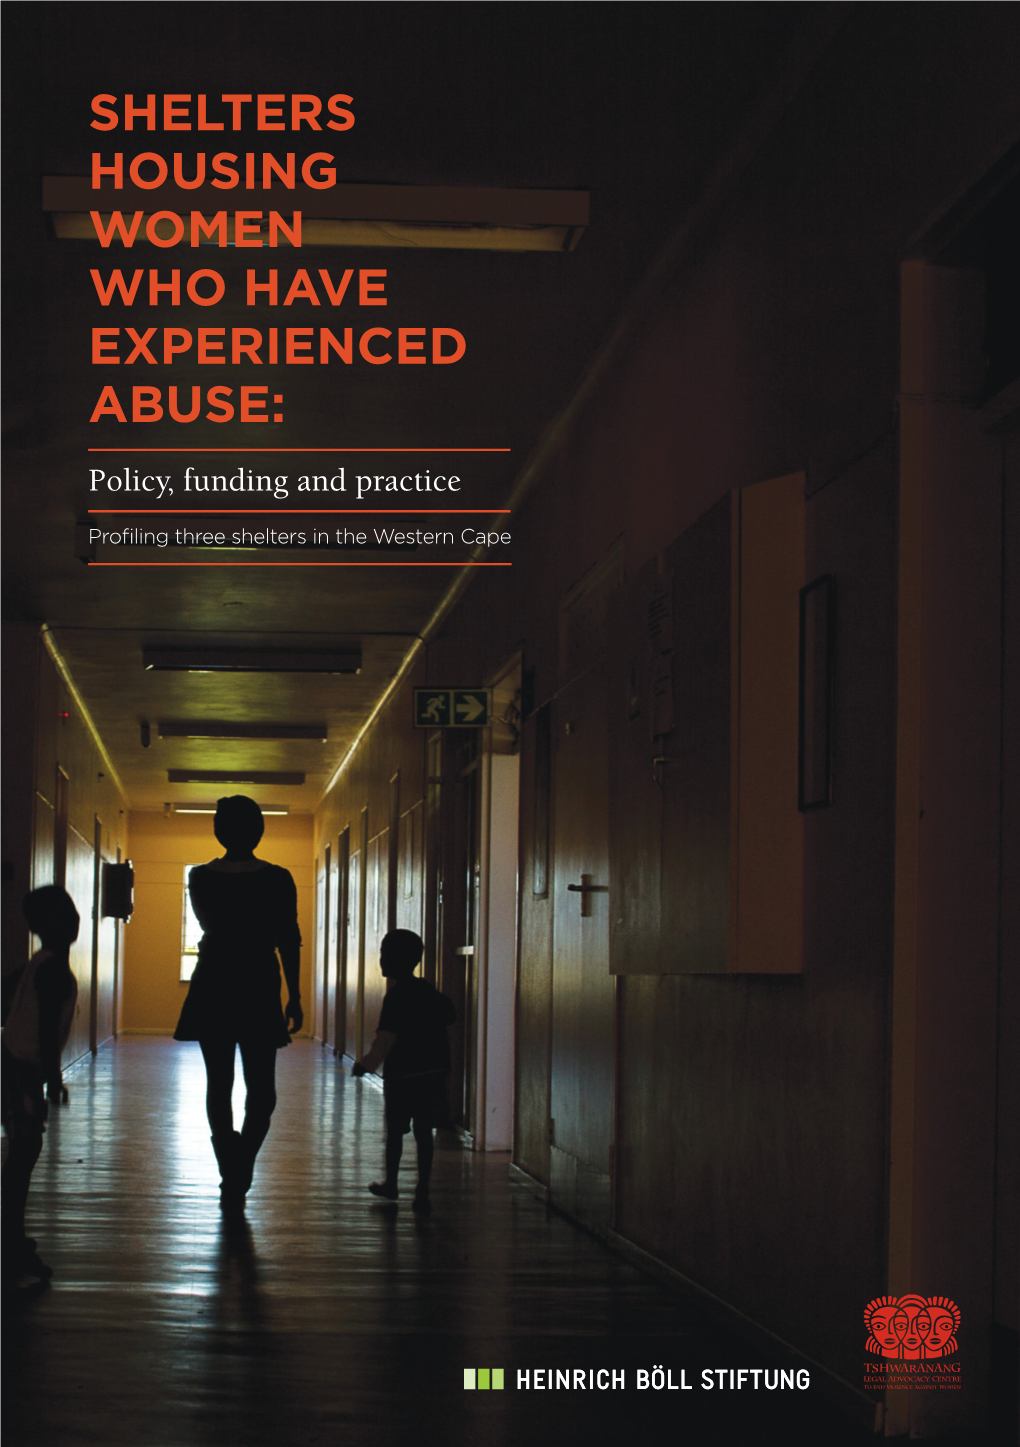 Shelters Housing Women Who Have Experienced Abuse